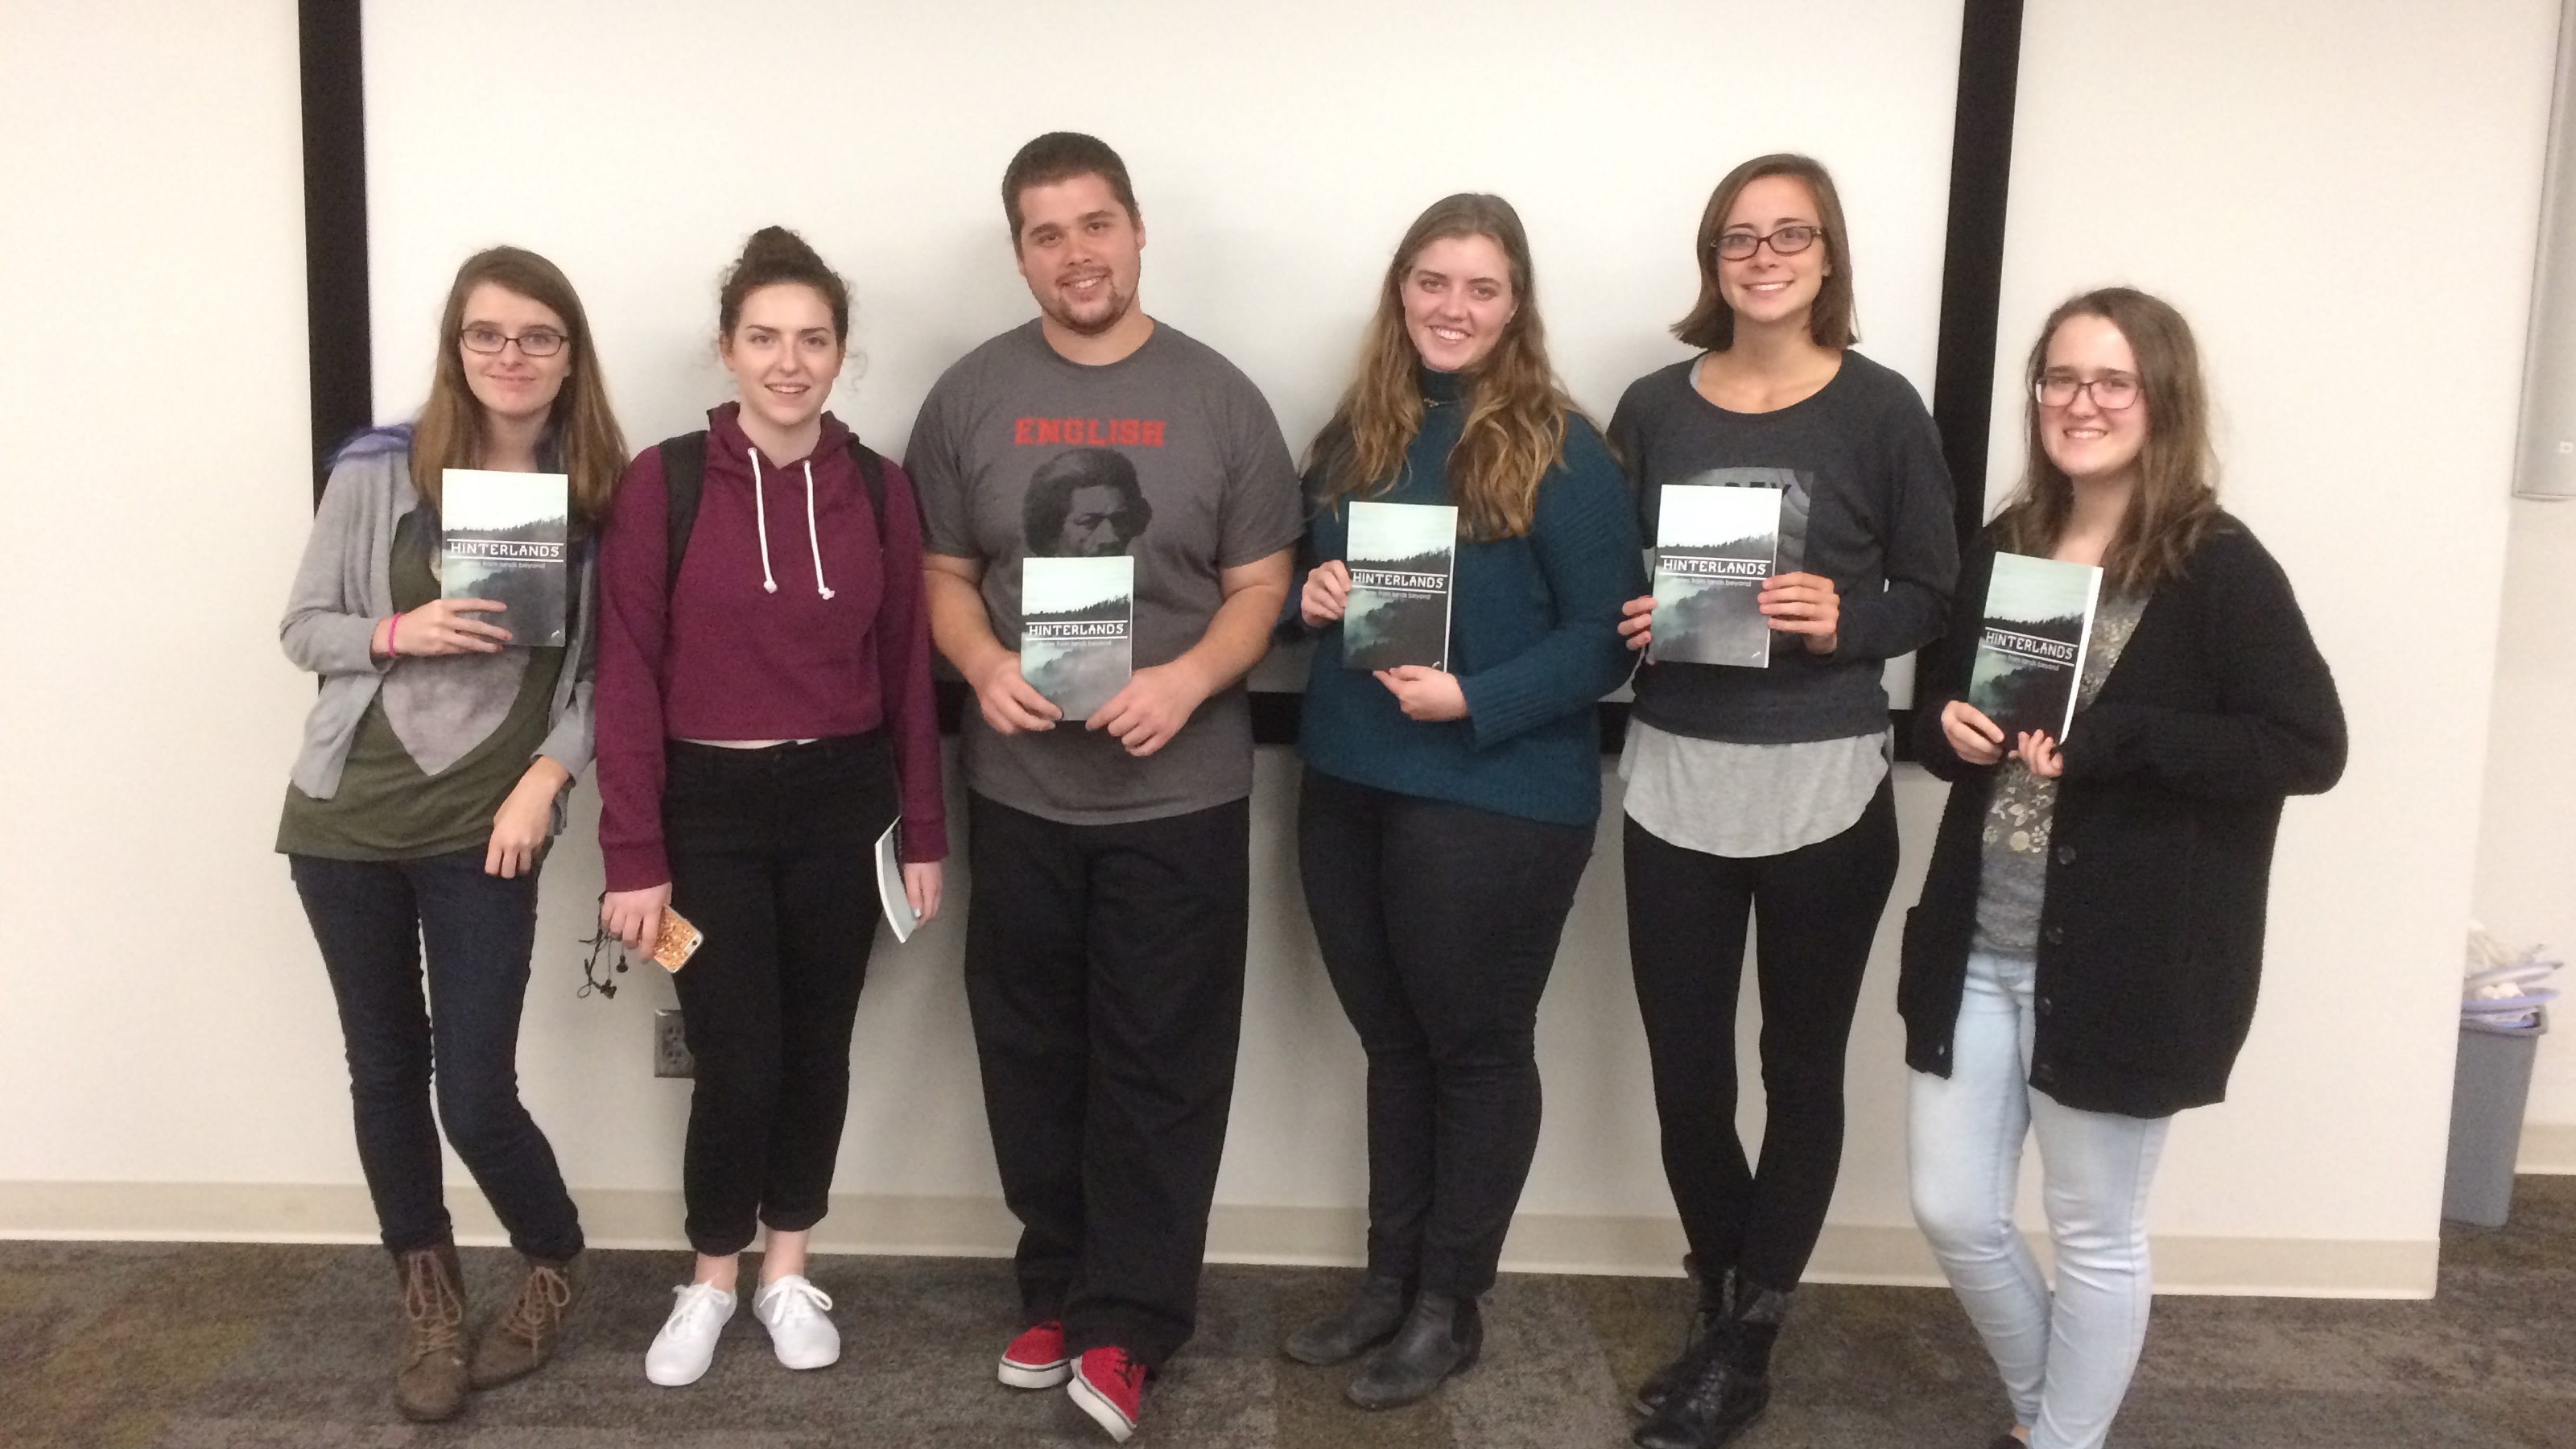 Students from Beverley Rilett's Editing and Publishing class pose with their first publication.; links to news story